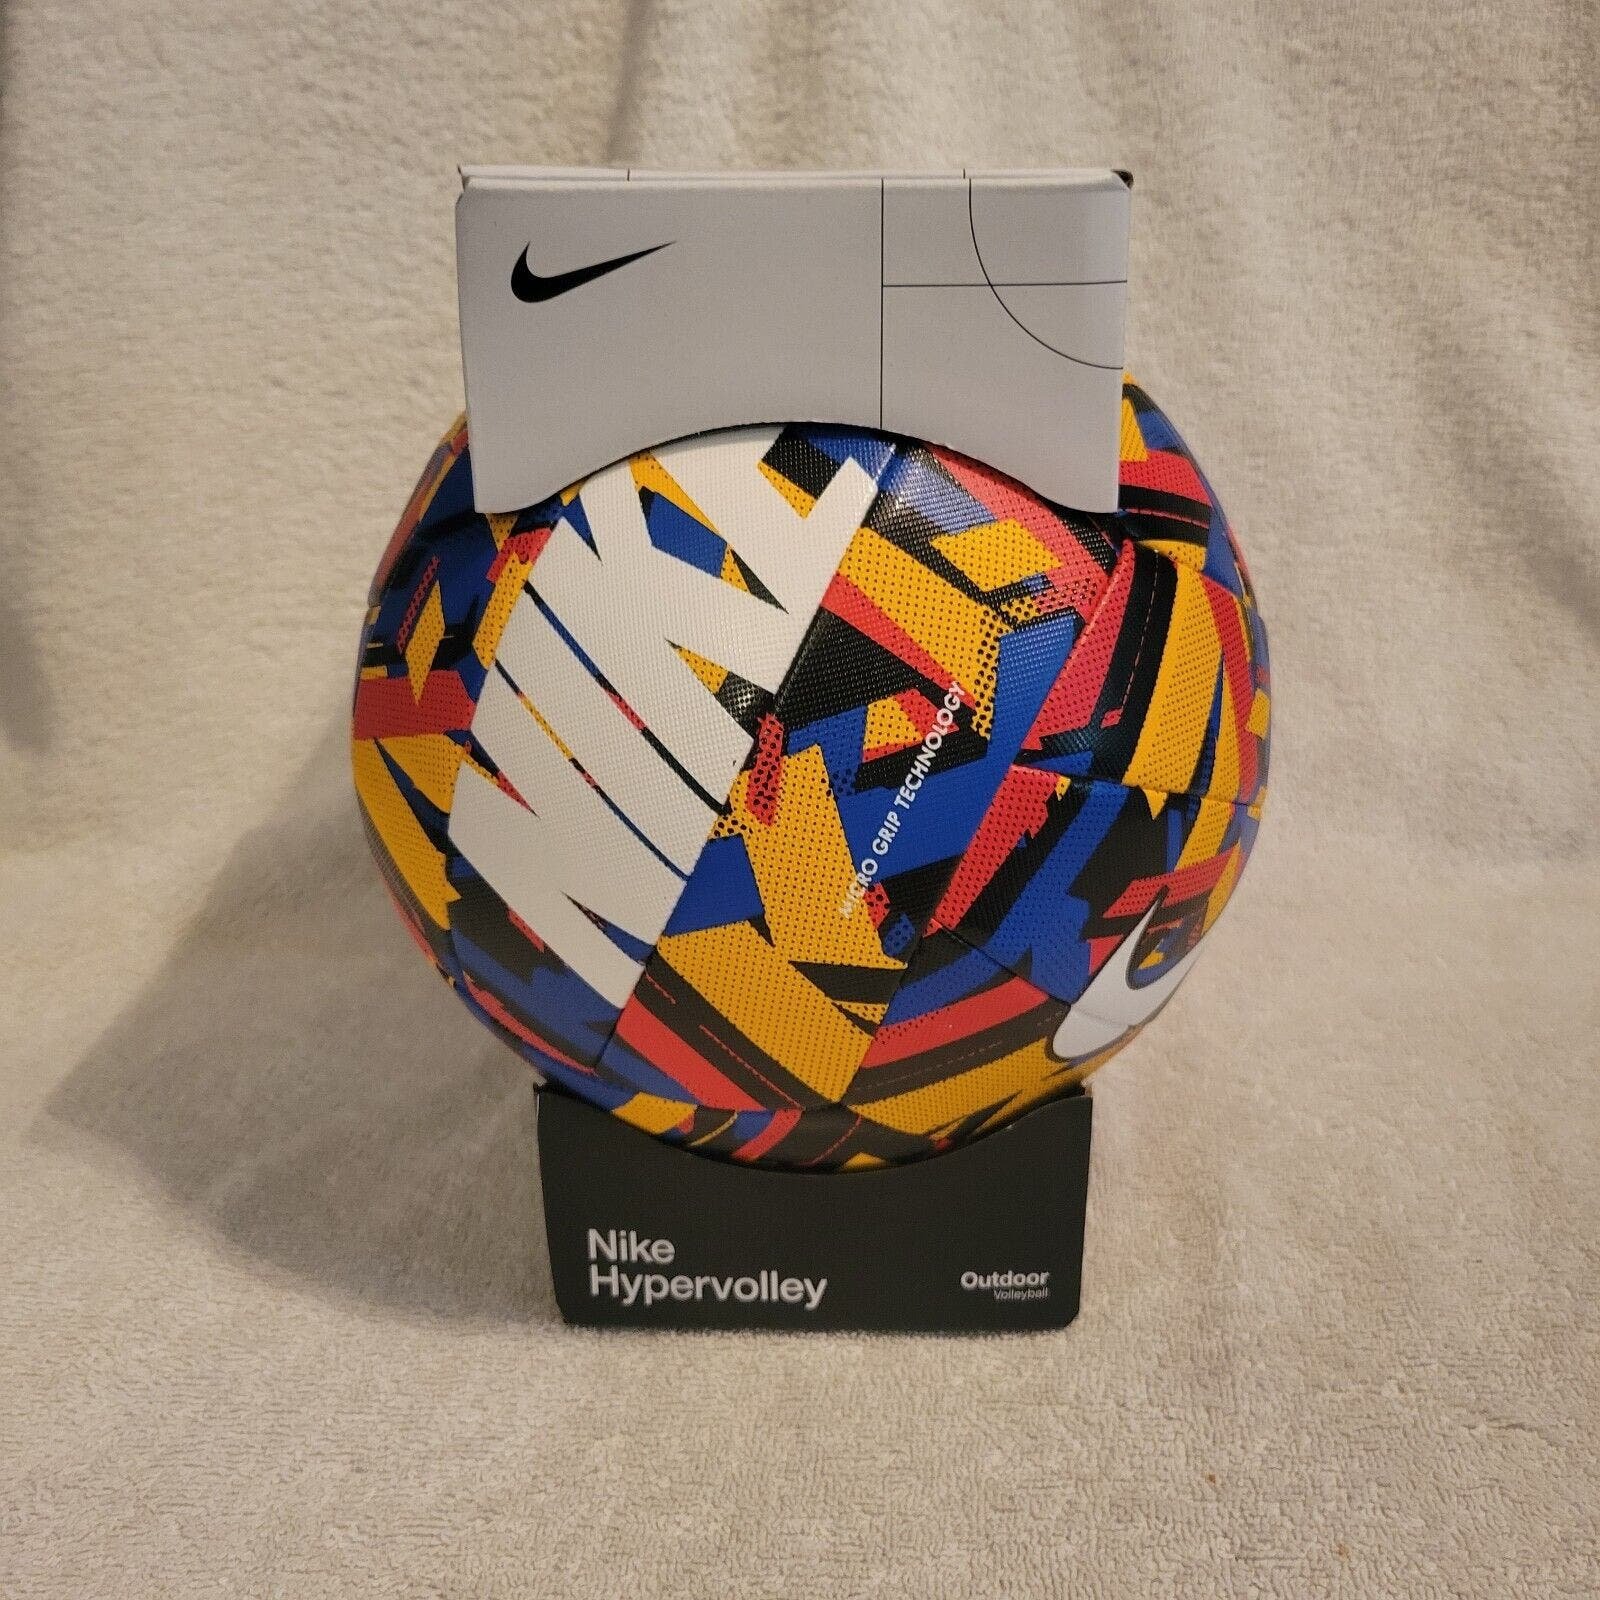 Nike Hypervolley 18 Panel Graphic Outdoor Volleyball NEW cmA5IvGTW